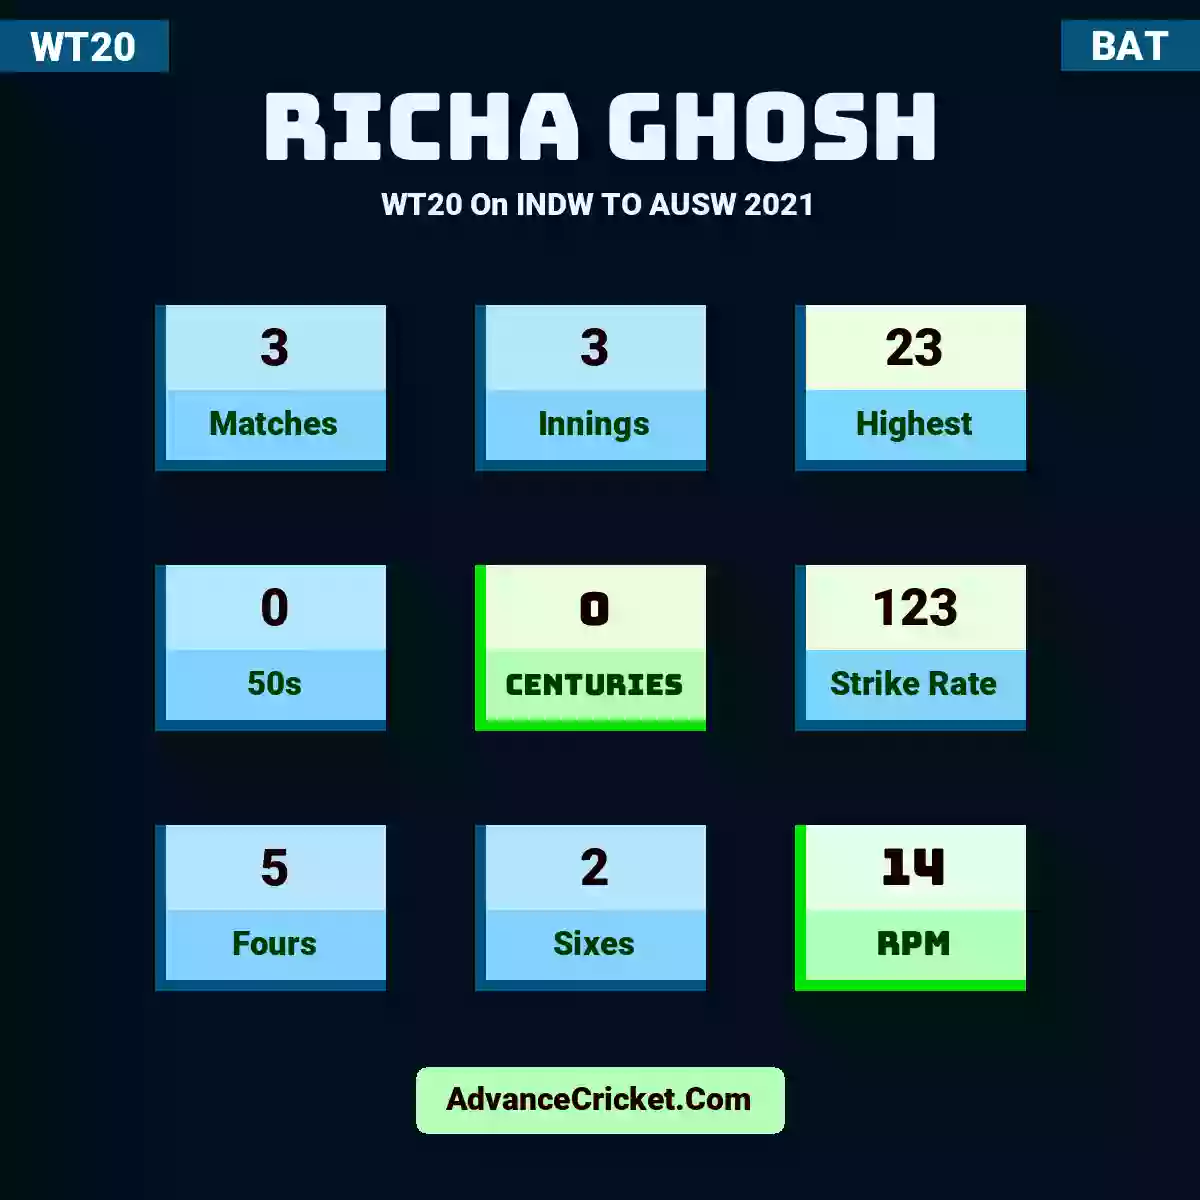 Richa Ghosh WT20  On INDW TO AUSW 2021, Richa Ghosh played 3 matches, scored 23 runs as highest, 0 half-centuries, and 0 centuries, with a strike rate of 123. R.Ghosh hit 5 fours and 2 sixes, with an RPM of 14.